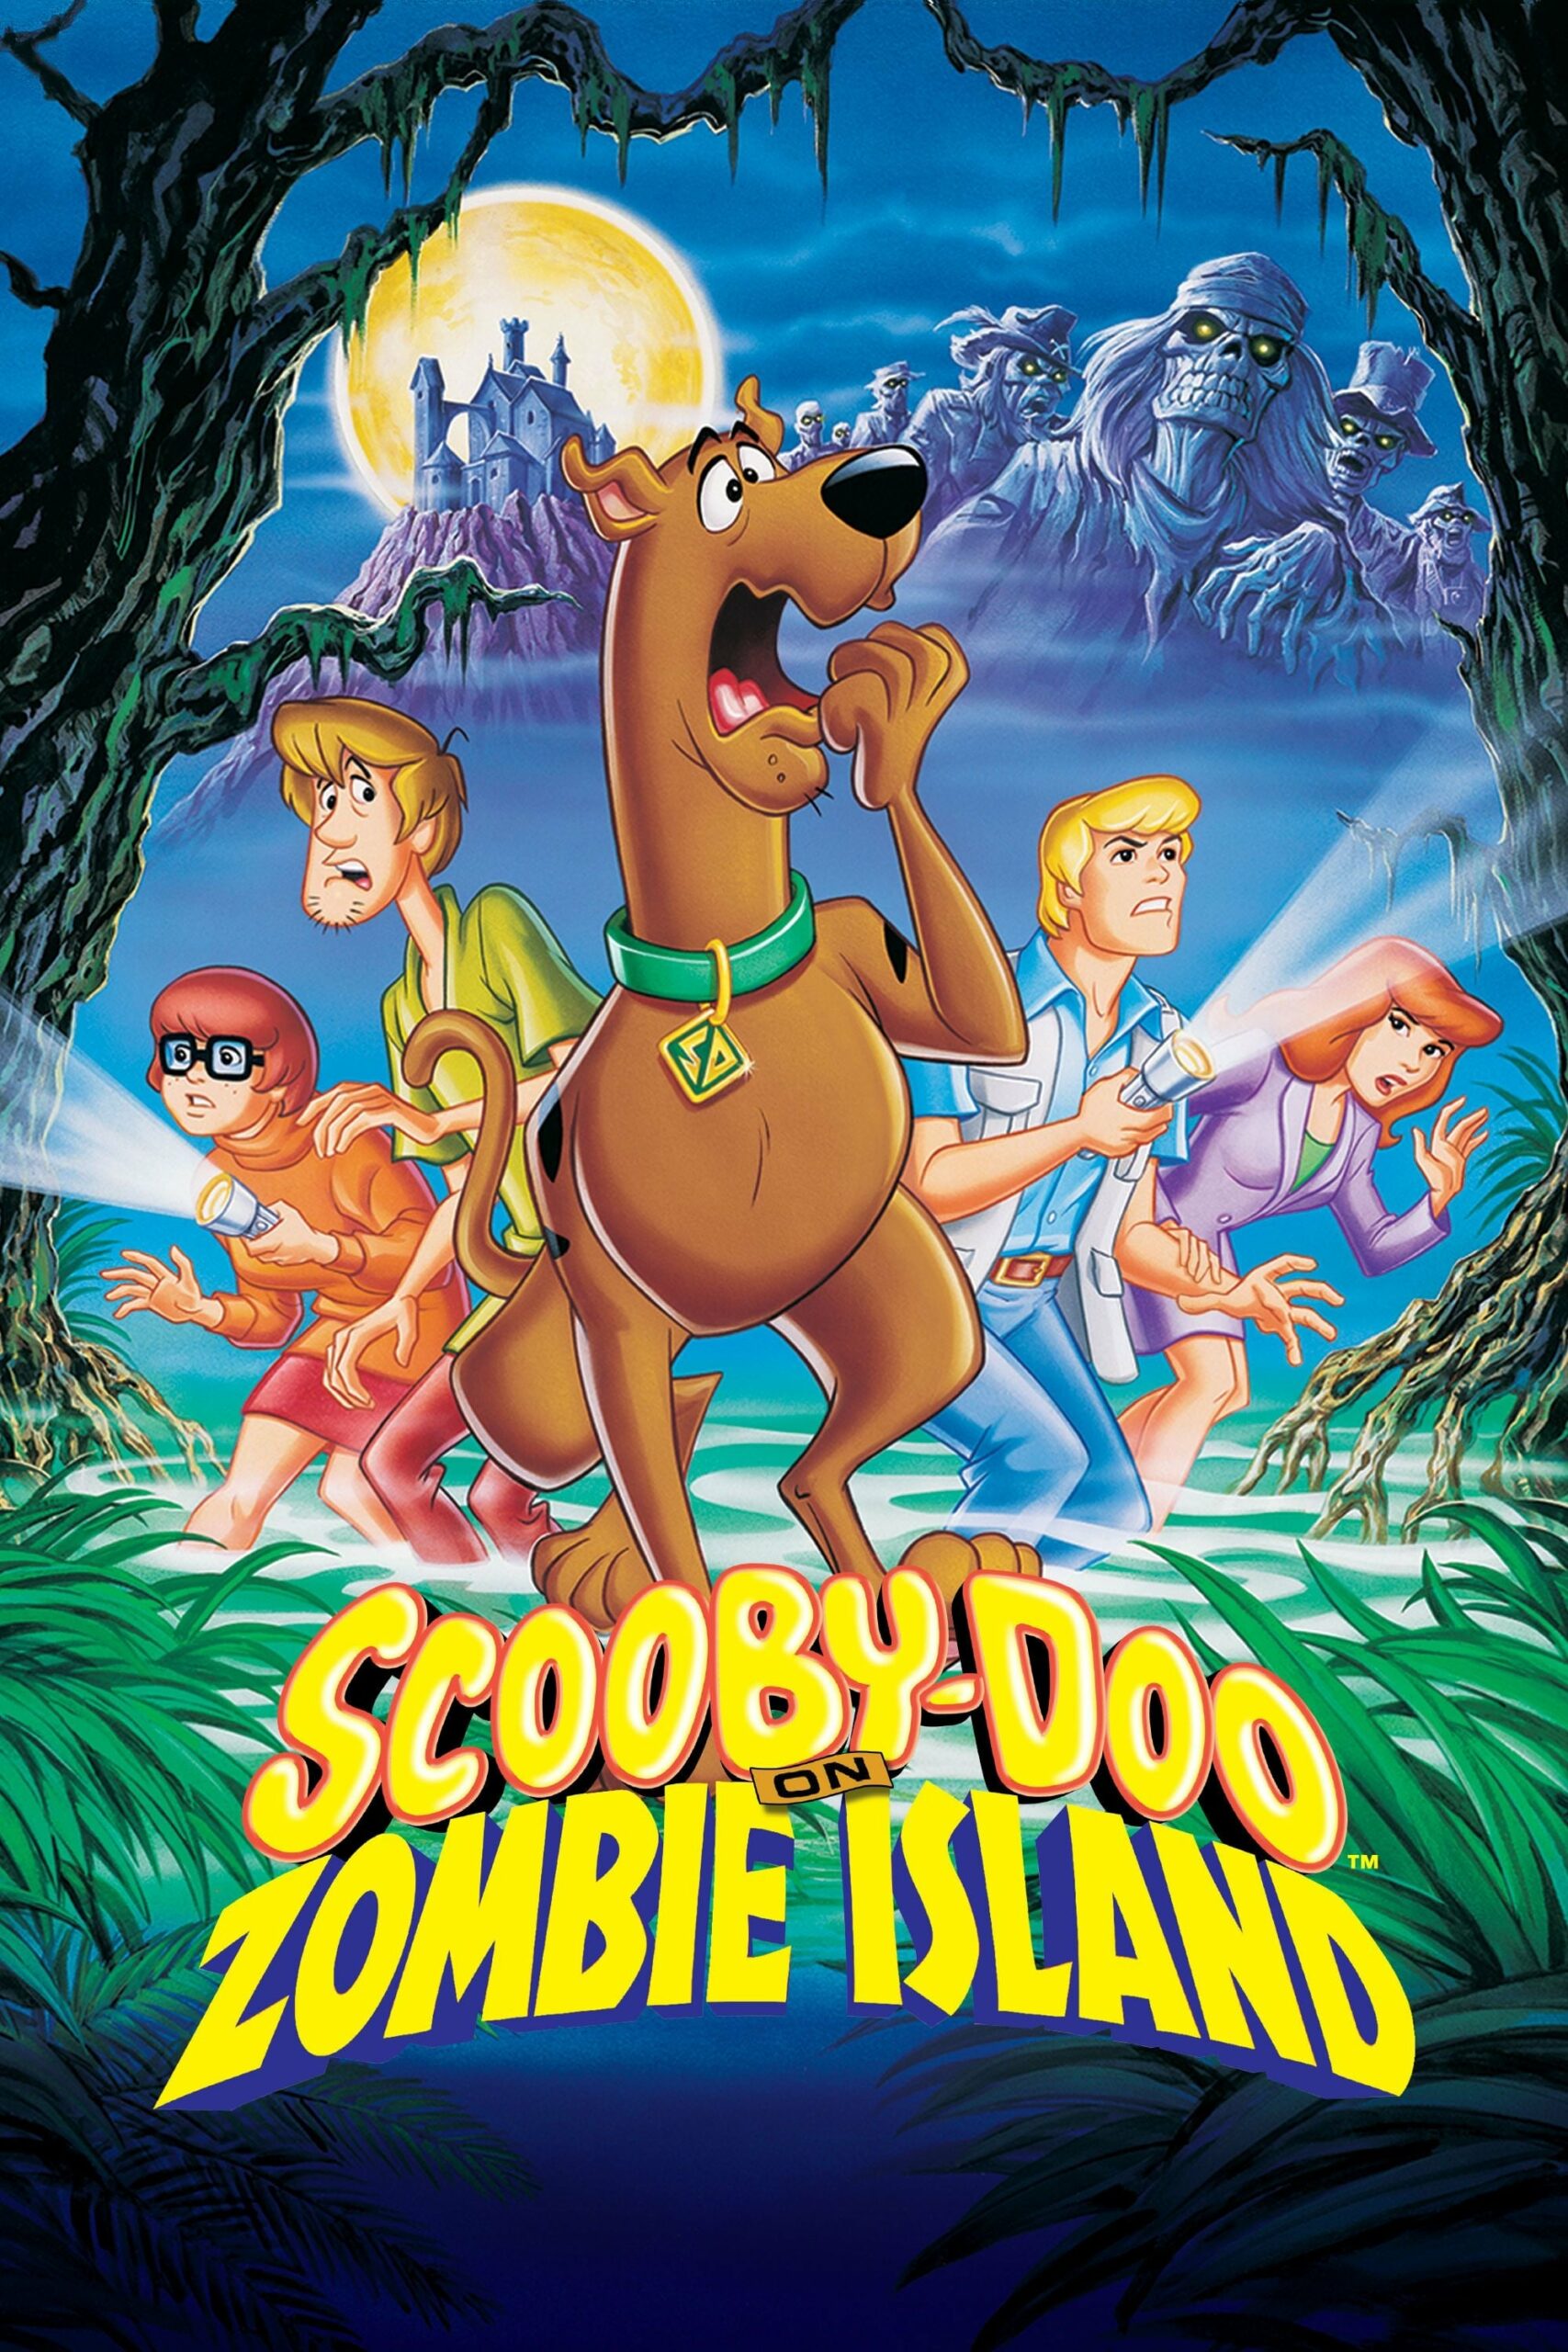 The movie poster for Scoby-Doo on Zombie Island